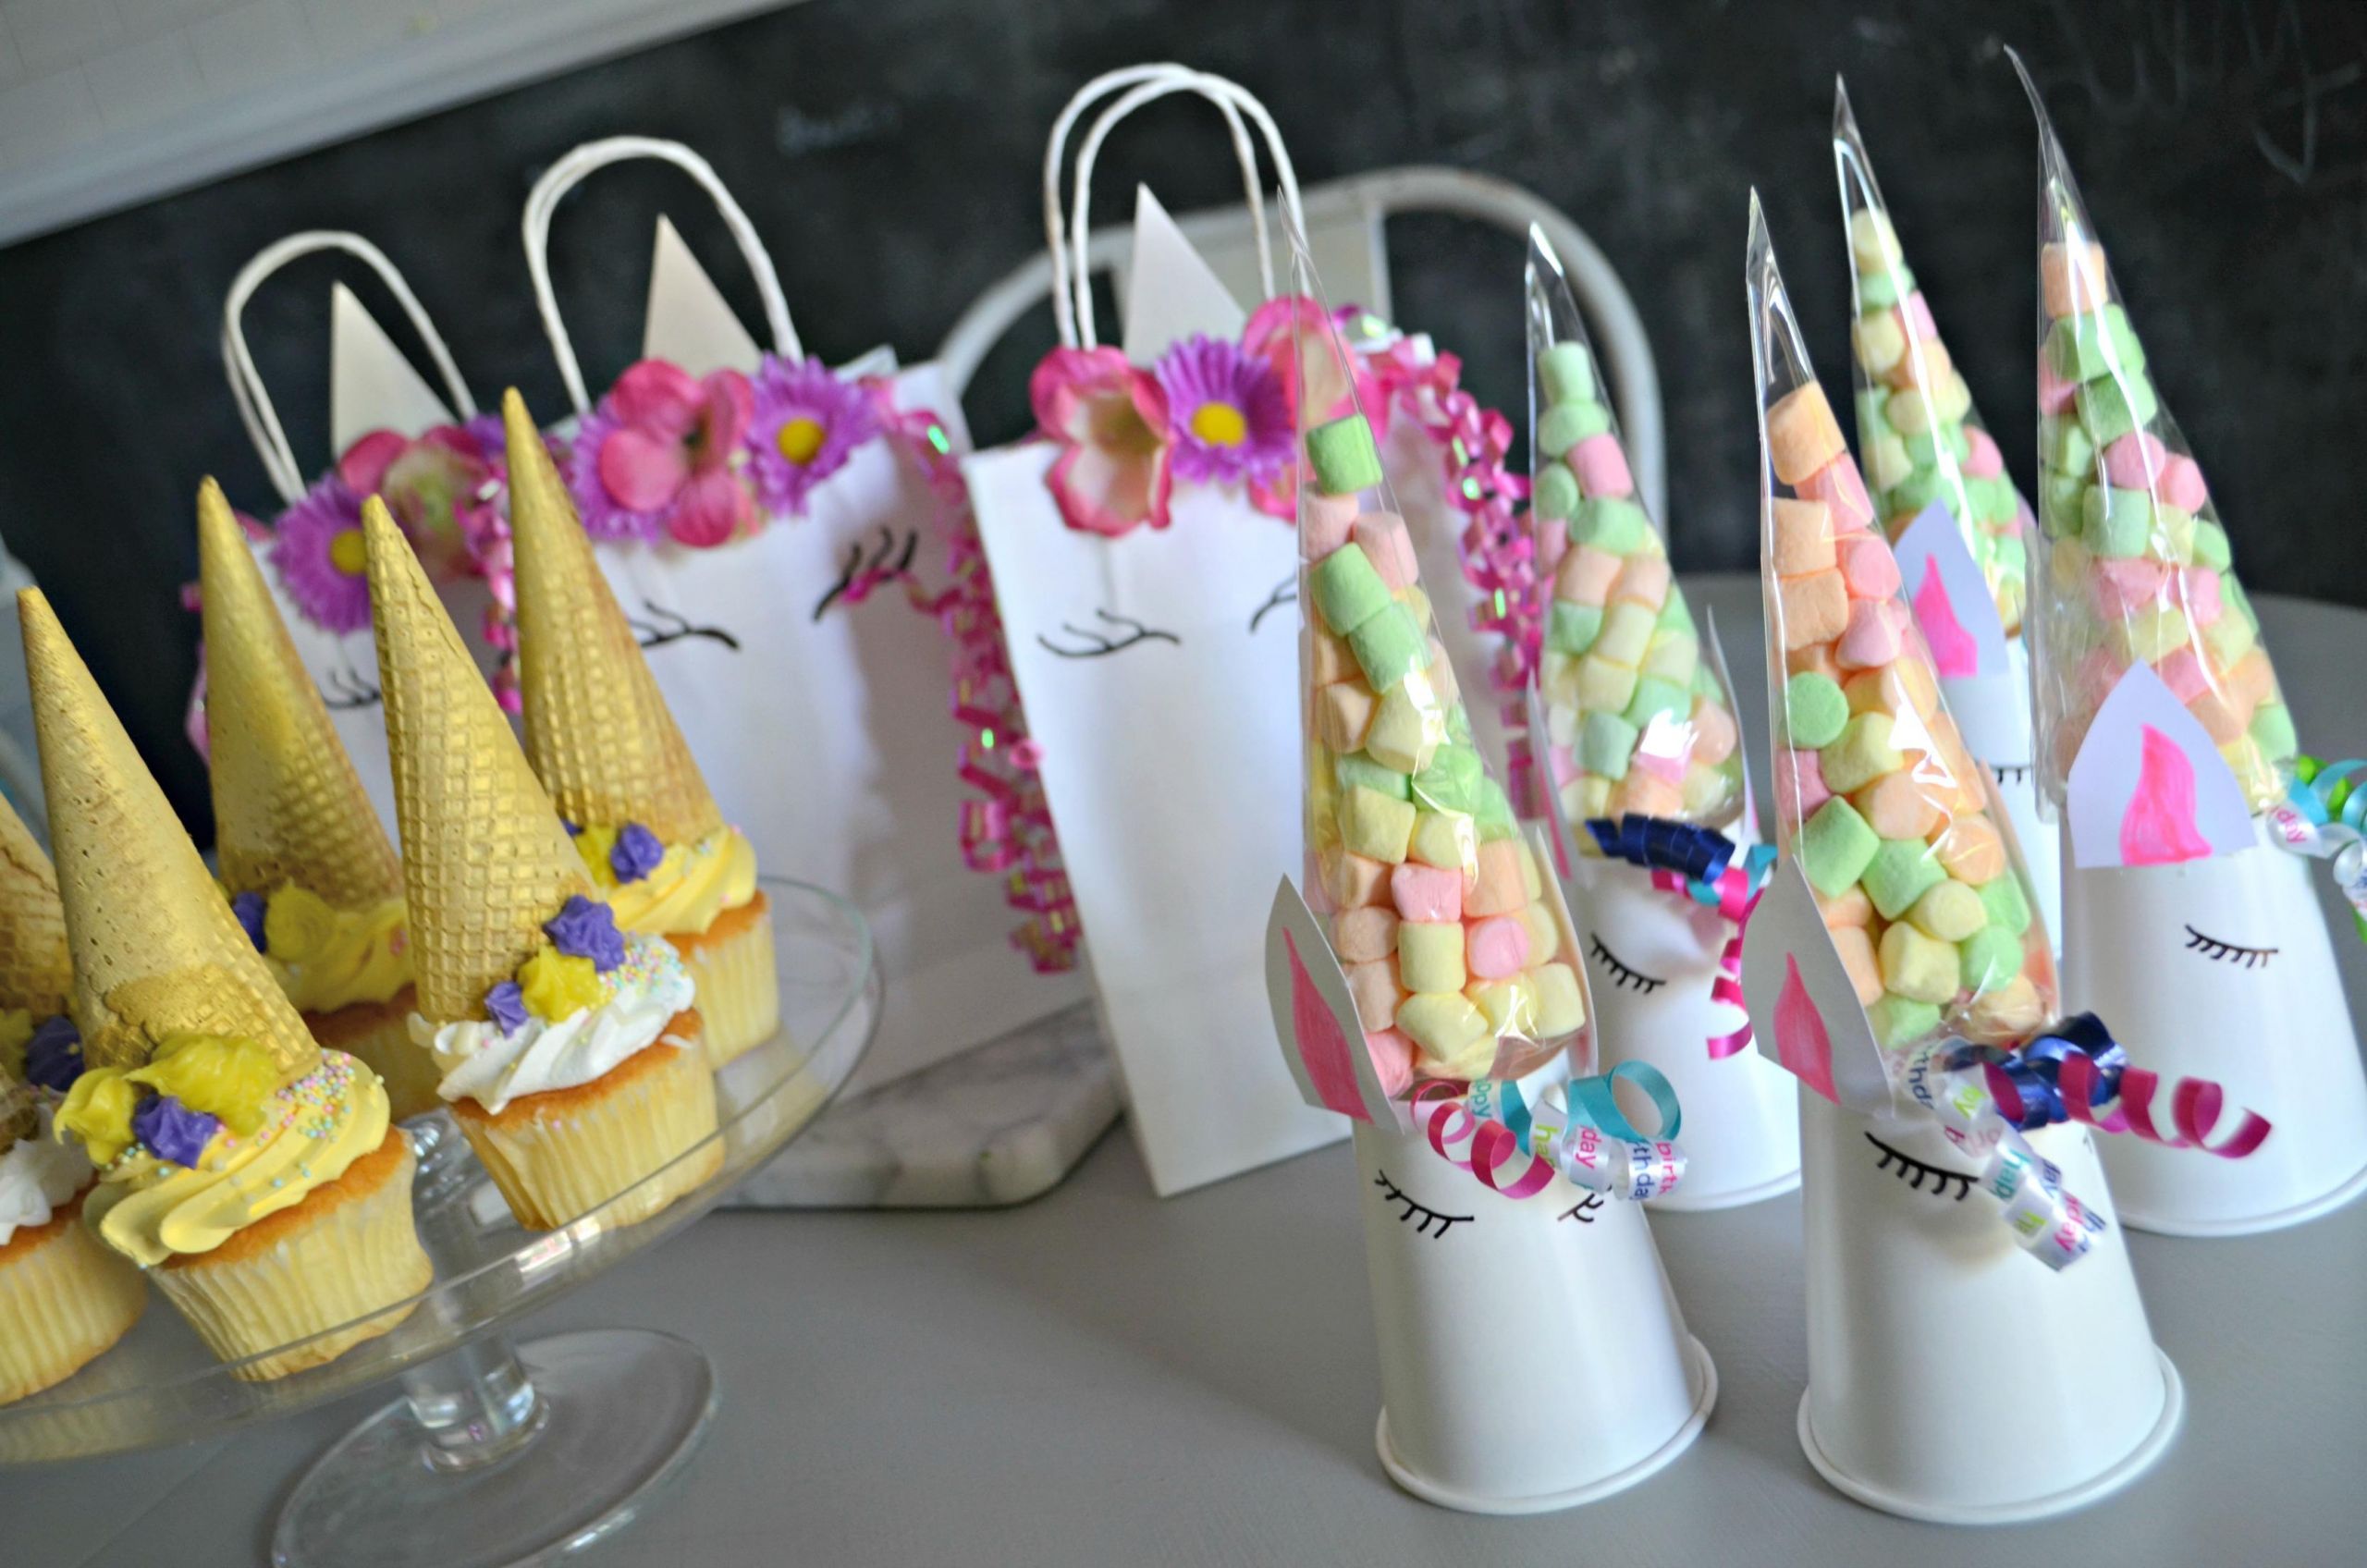 Ideas For A Unicorn Child'S Birthday Party
 Make These 3 Frugal Cute and Easy DIY Unicorn Birthday